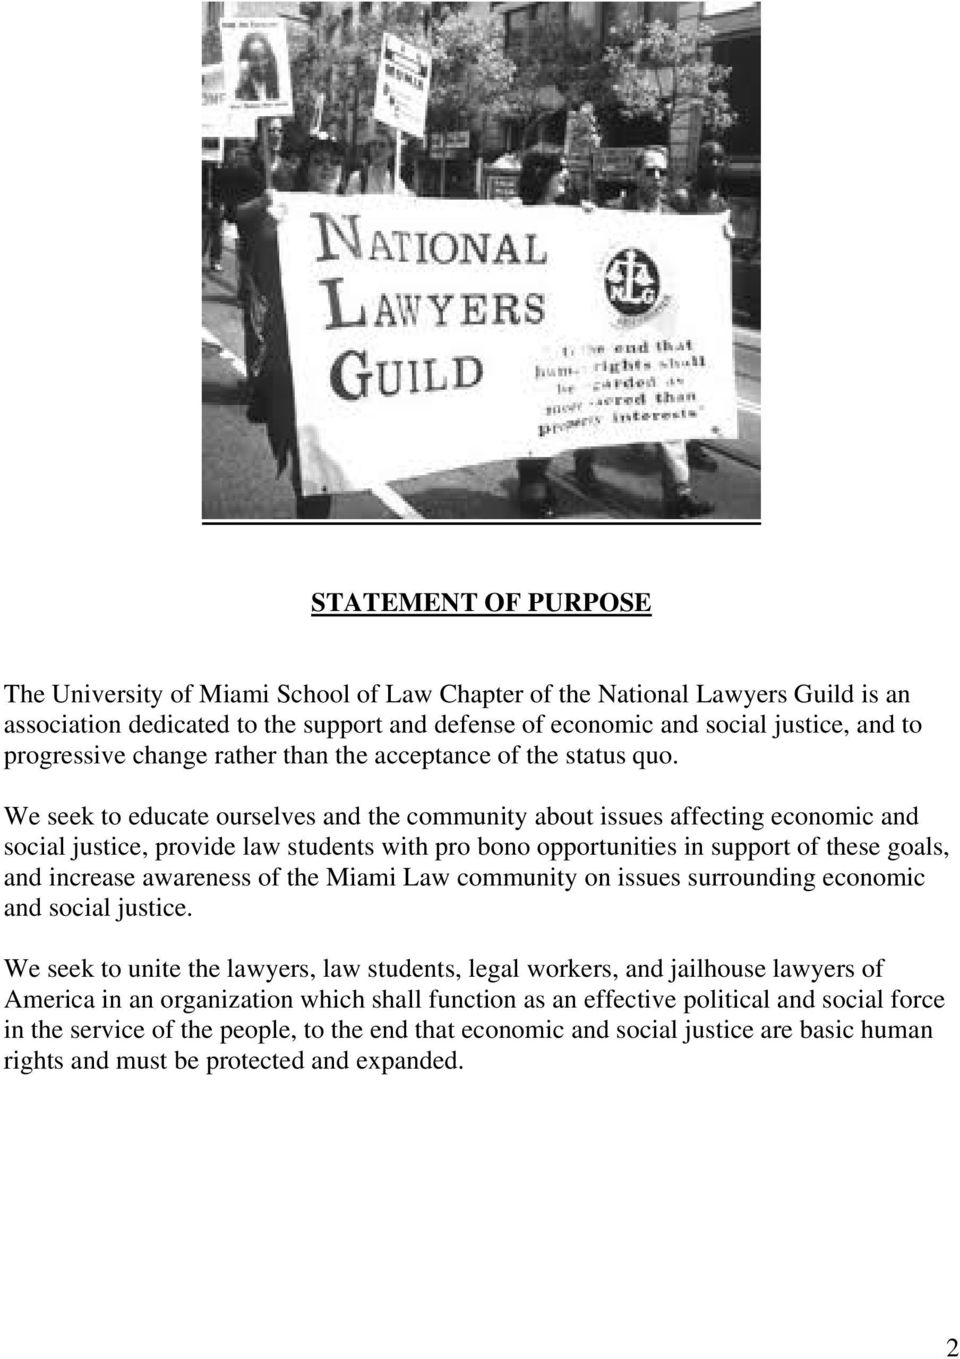 We seek to educate ourselves and the community about issues affecting economic and social justice, provide law students with pro bono opportunities in support of these goals, and increase awareness